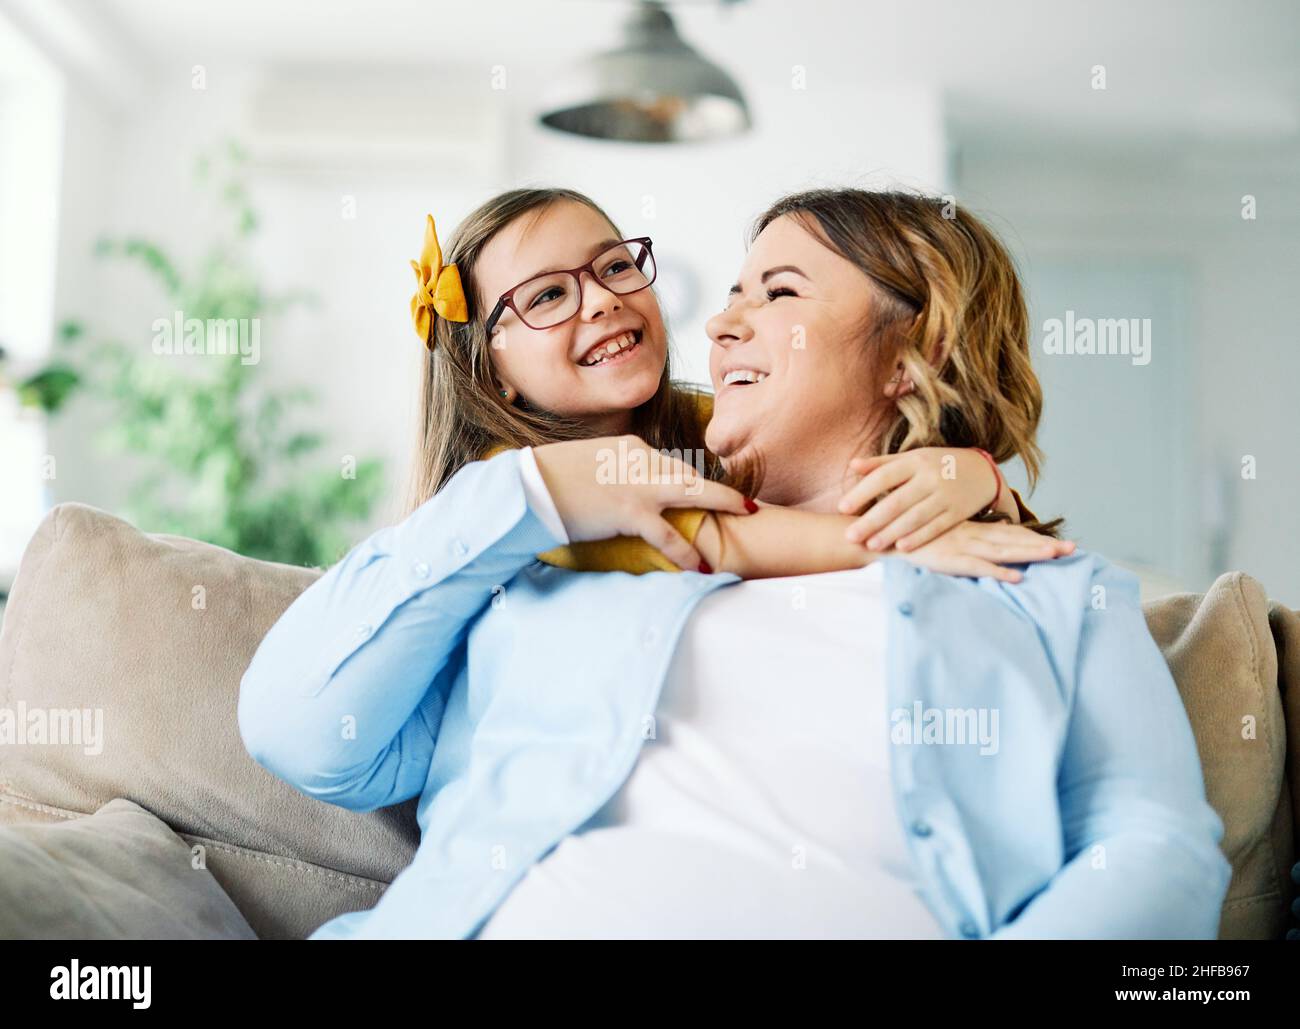 child mother family love parent home woman happy smiling playing kid together childhood girl mom daughter Stock Photo